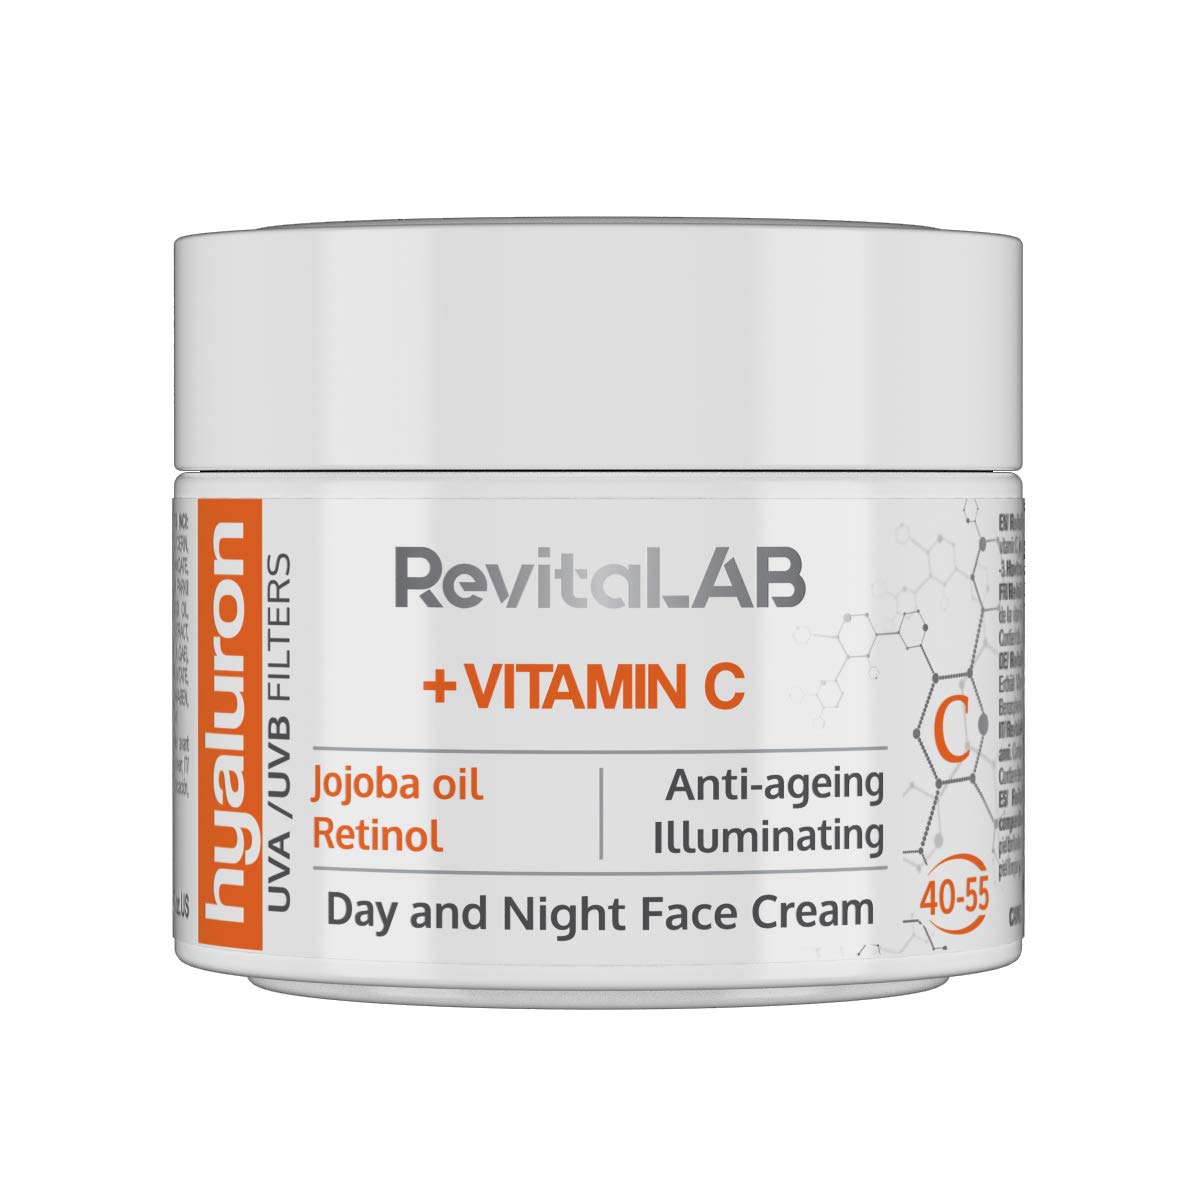 RevitaLAB Hyaluron Anti-Ageing Day and Night Cream, Enriched with Vitamins A, B3, B5, E, C, Jojoba Oil and UV Filters, for Ages 40 – 55, 50 ml